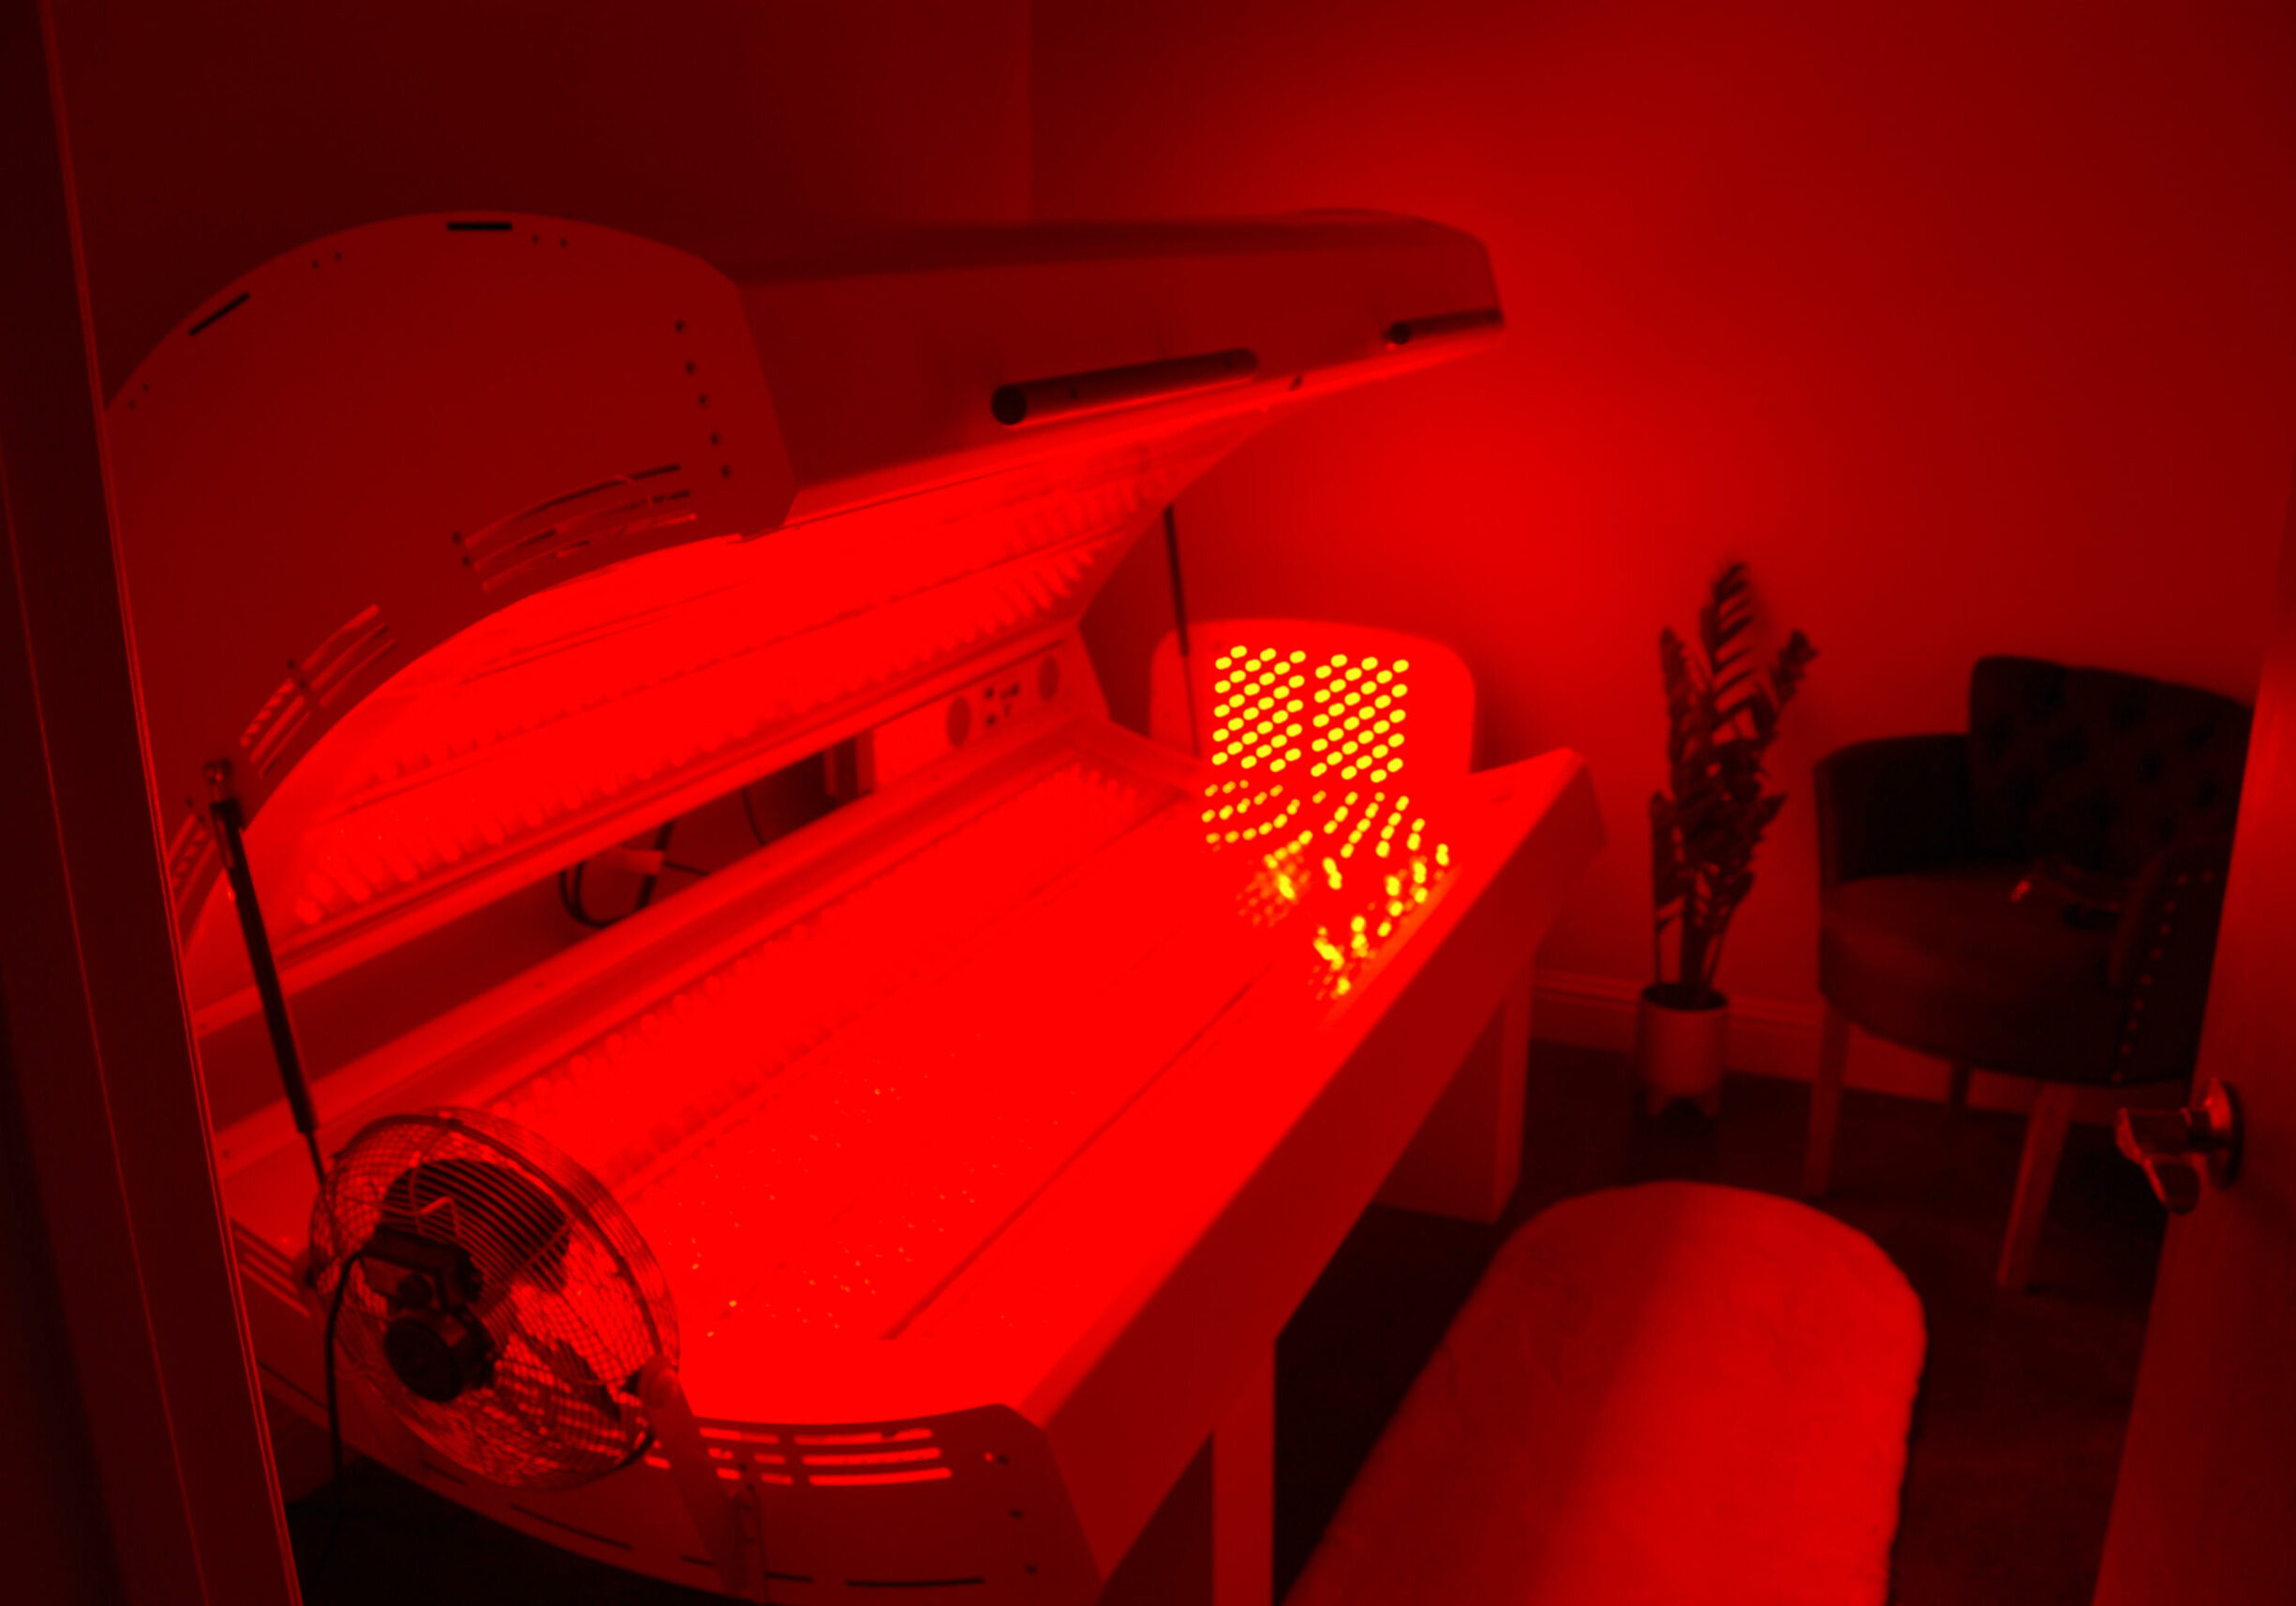 Red Light Therapy